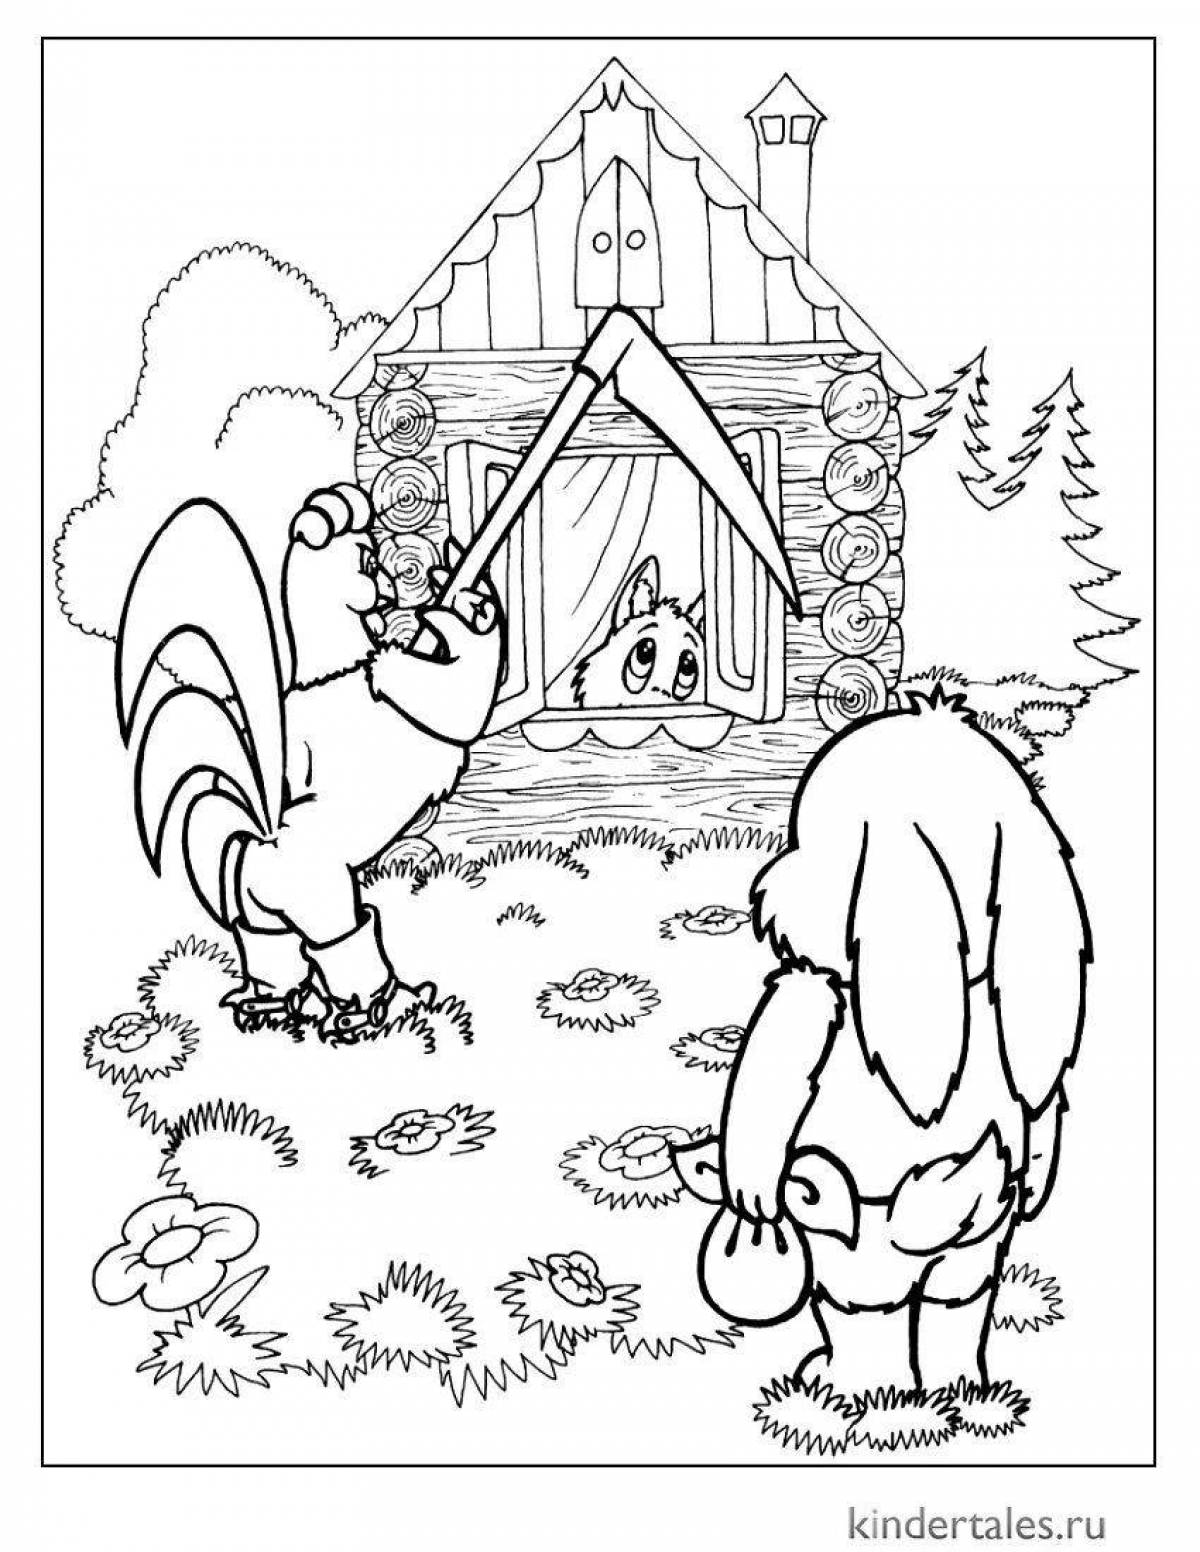 Charming hare house coloring for young people